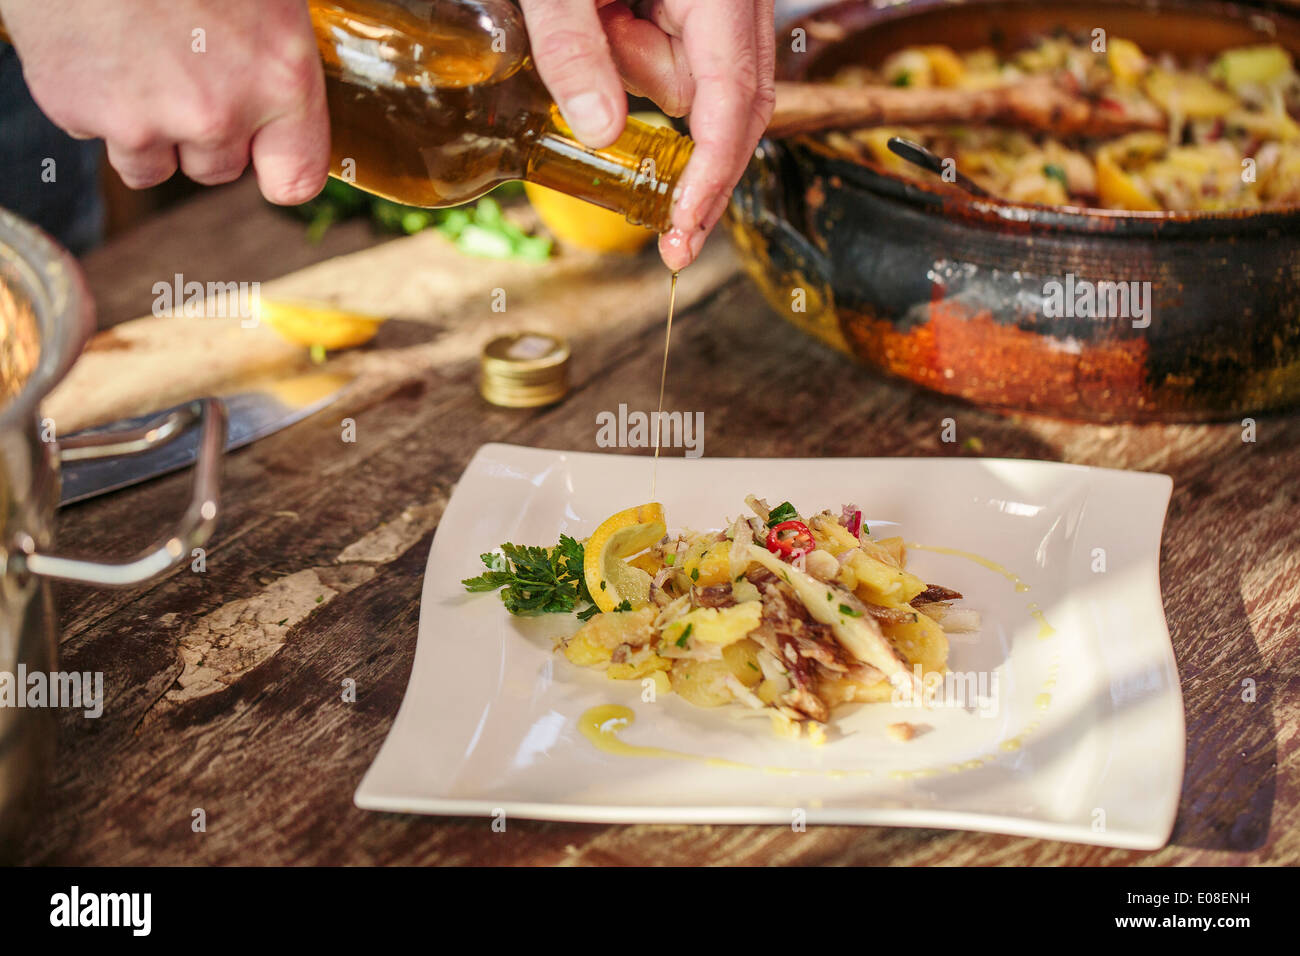 Person pouring olive oil on smoked pike dish Stock Photo